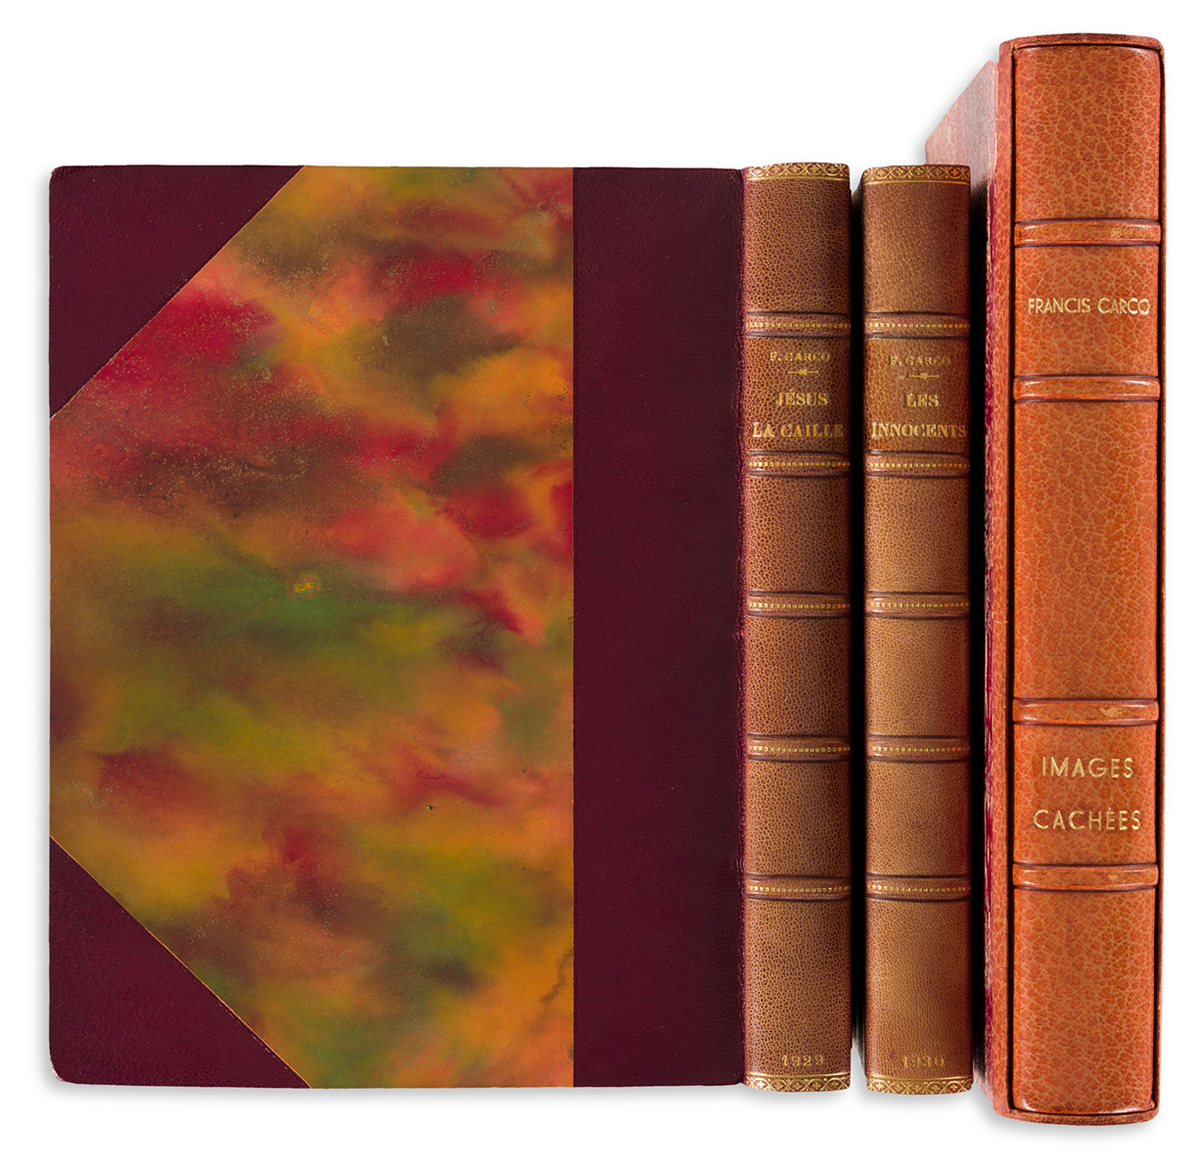 FRANCIS CARCO (1886 1958) Three Limited Edition Titles